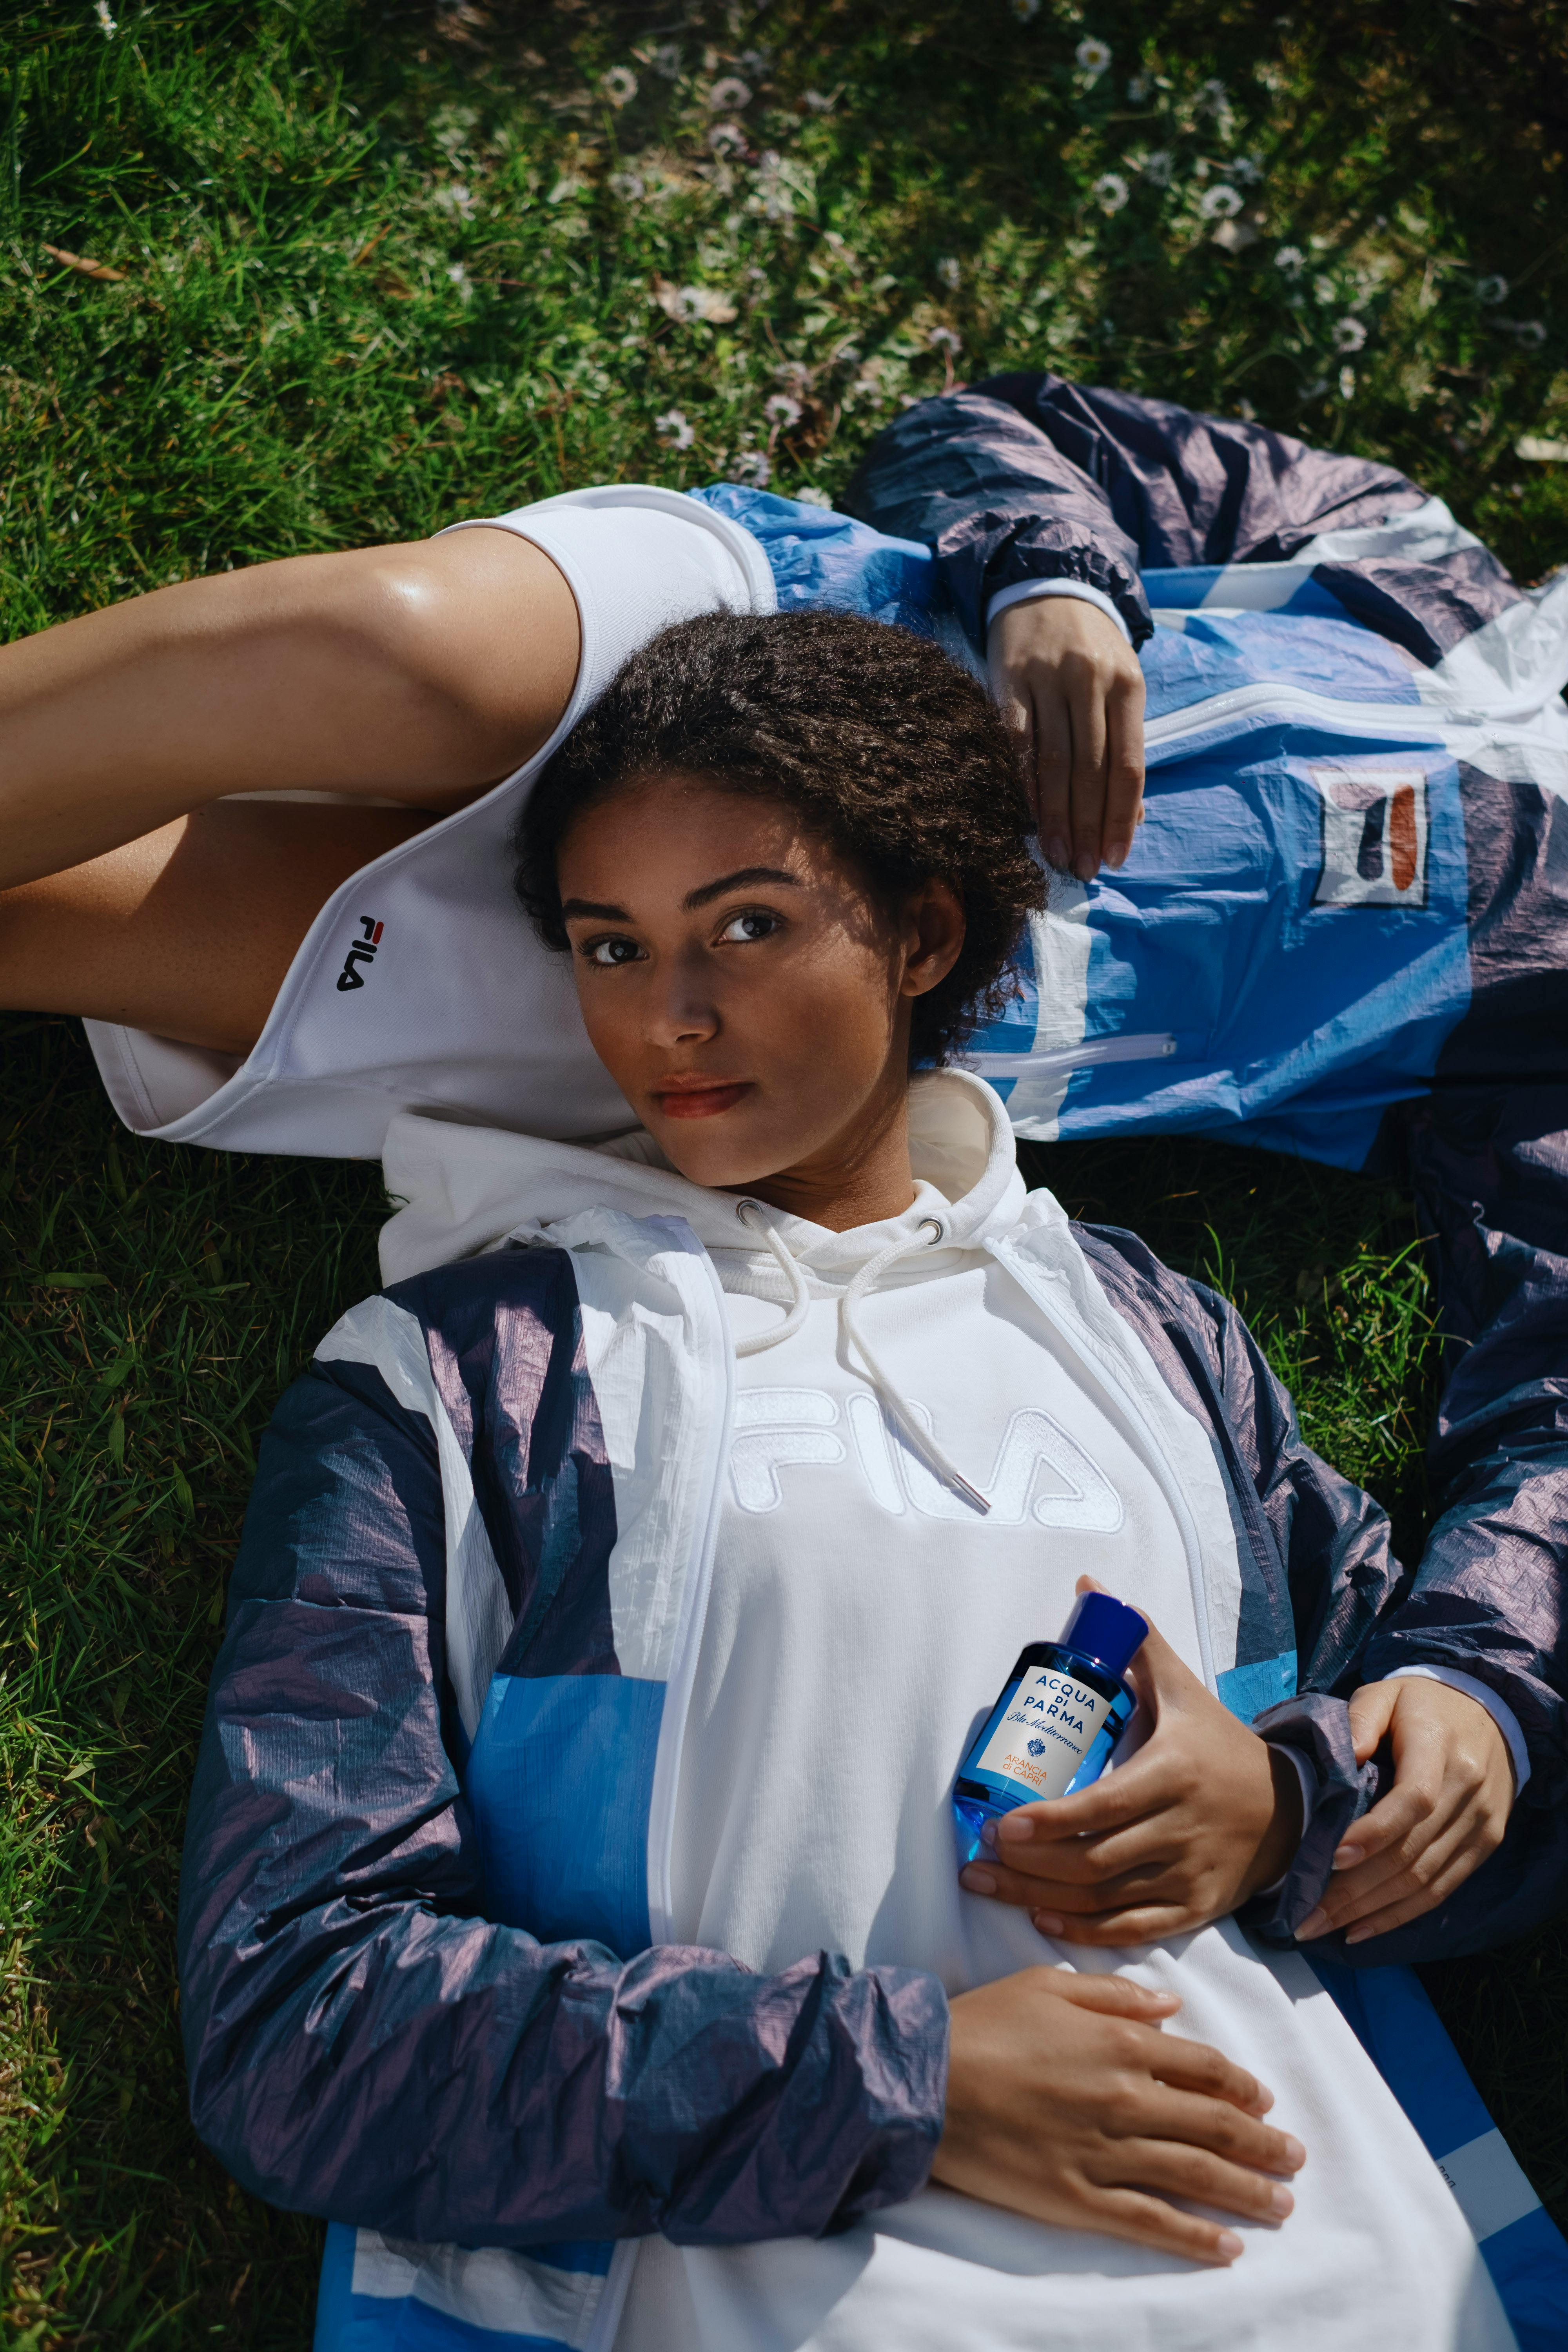 amateur Individualiteit Embryo What can we expect from the unexpected collab Fila x Acqua di Parma?